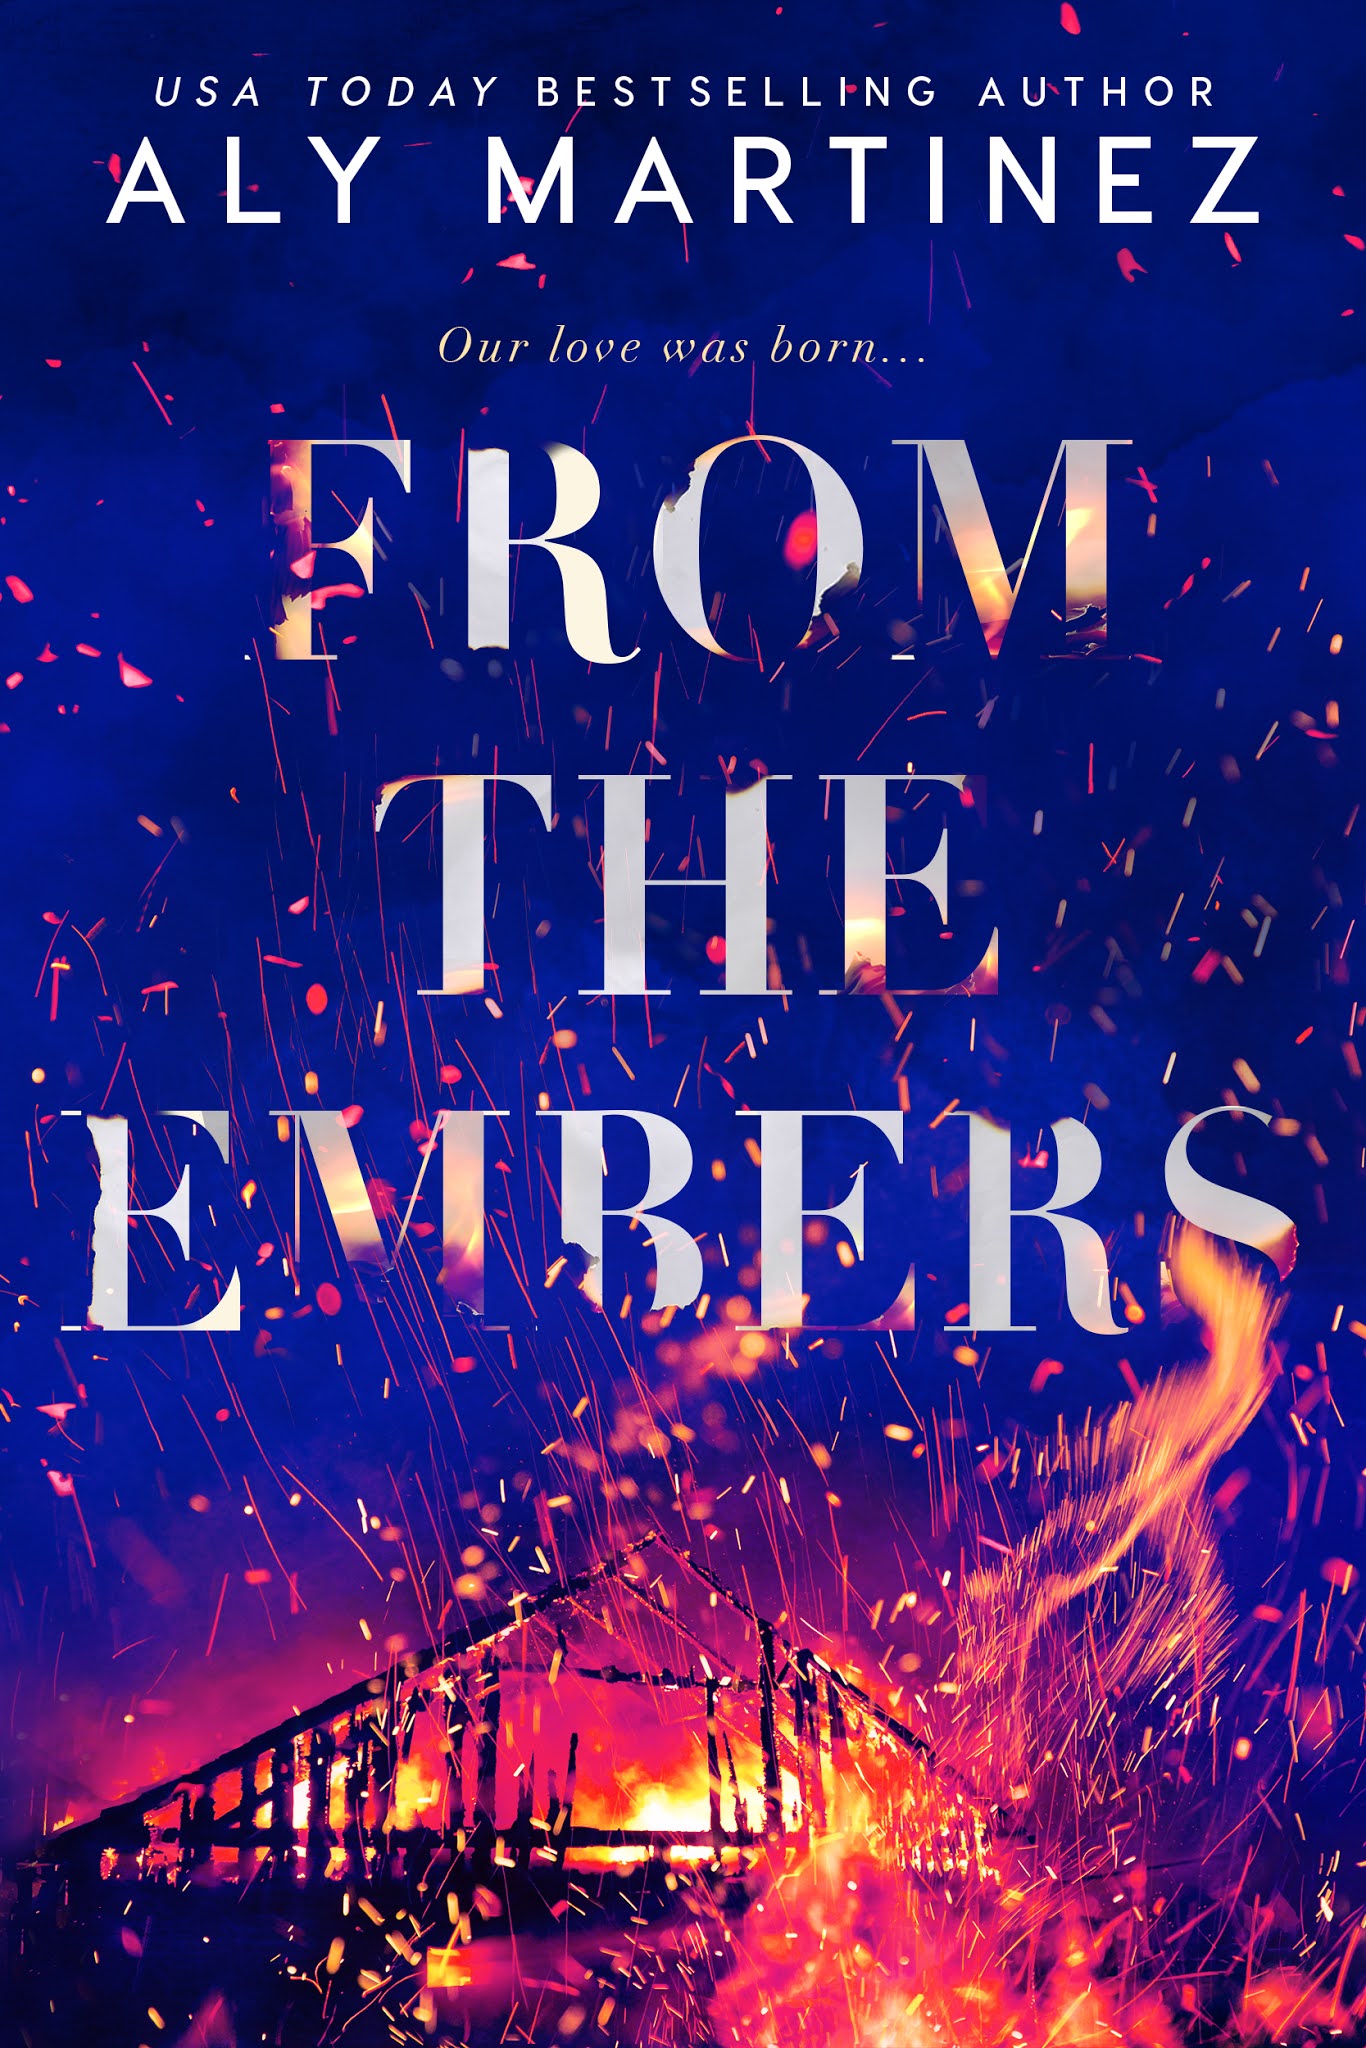 embers book review new york times